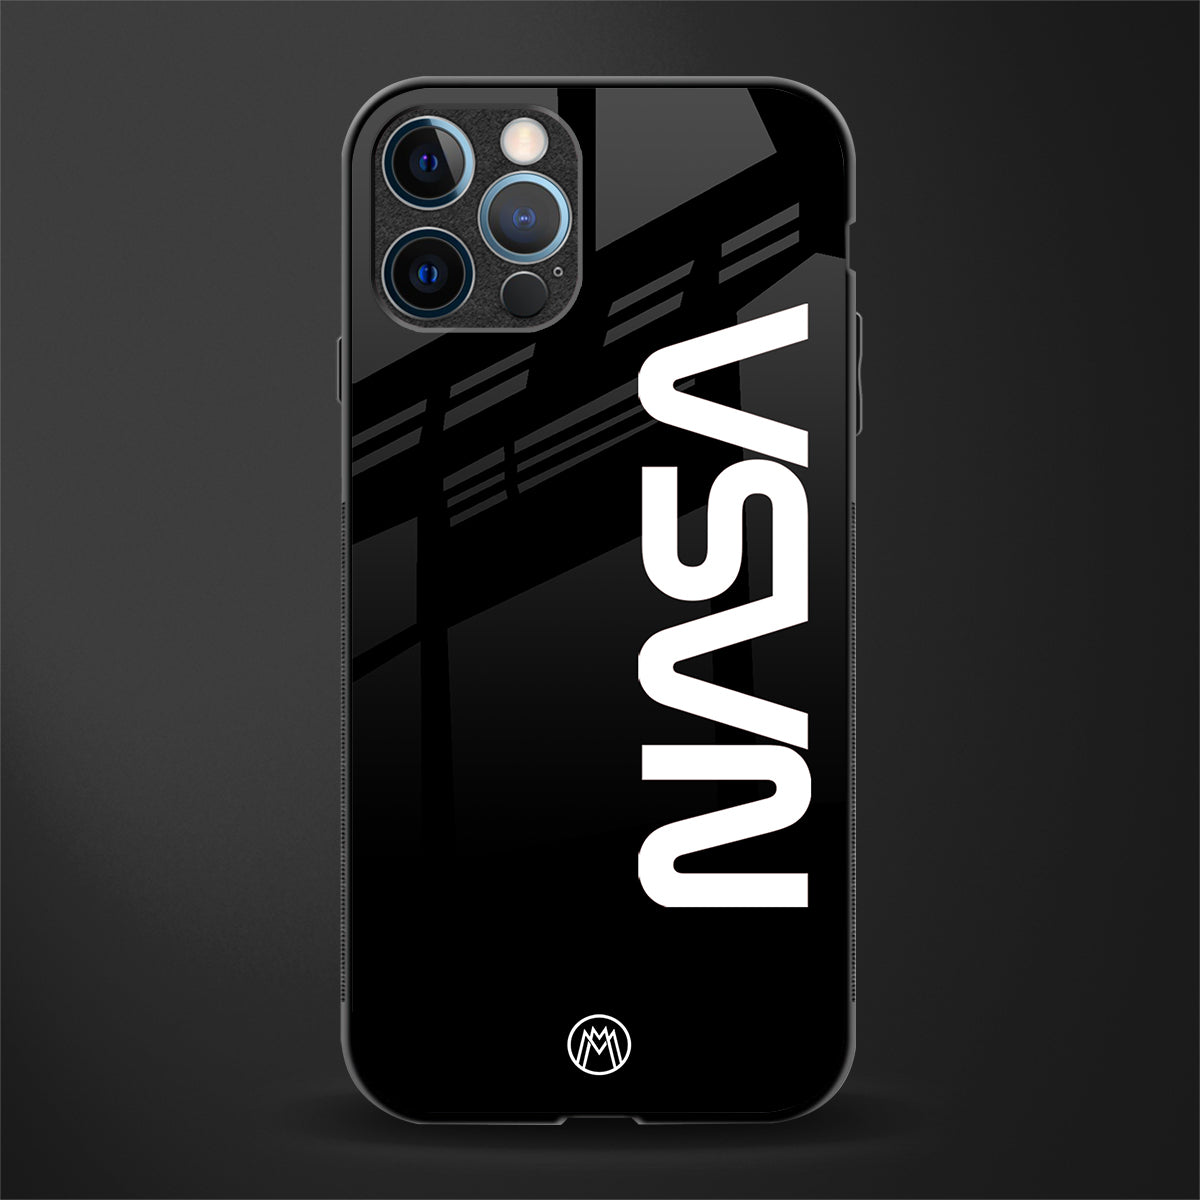 nasa black glass case for iphone 12 pro max image